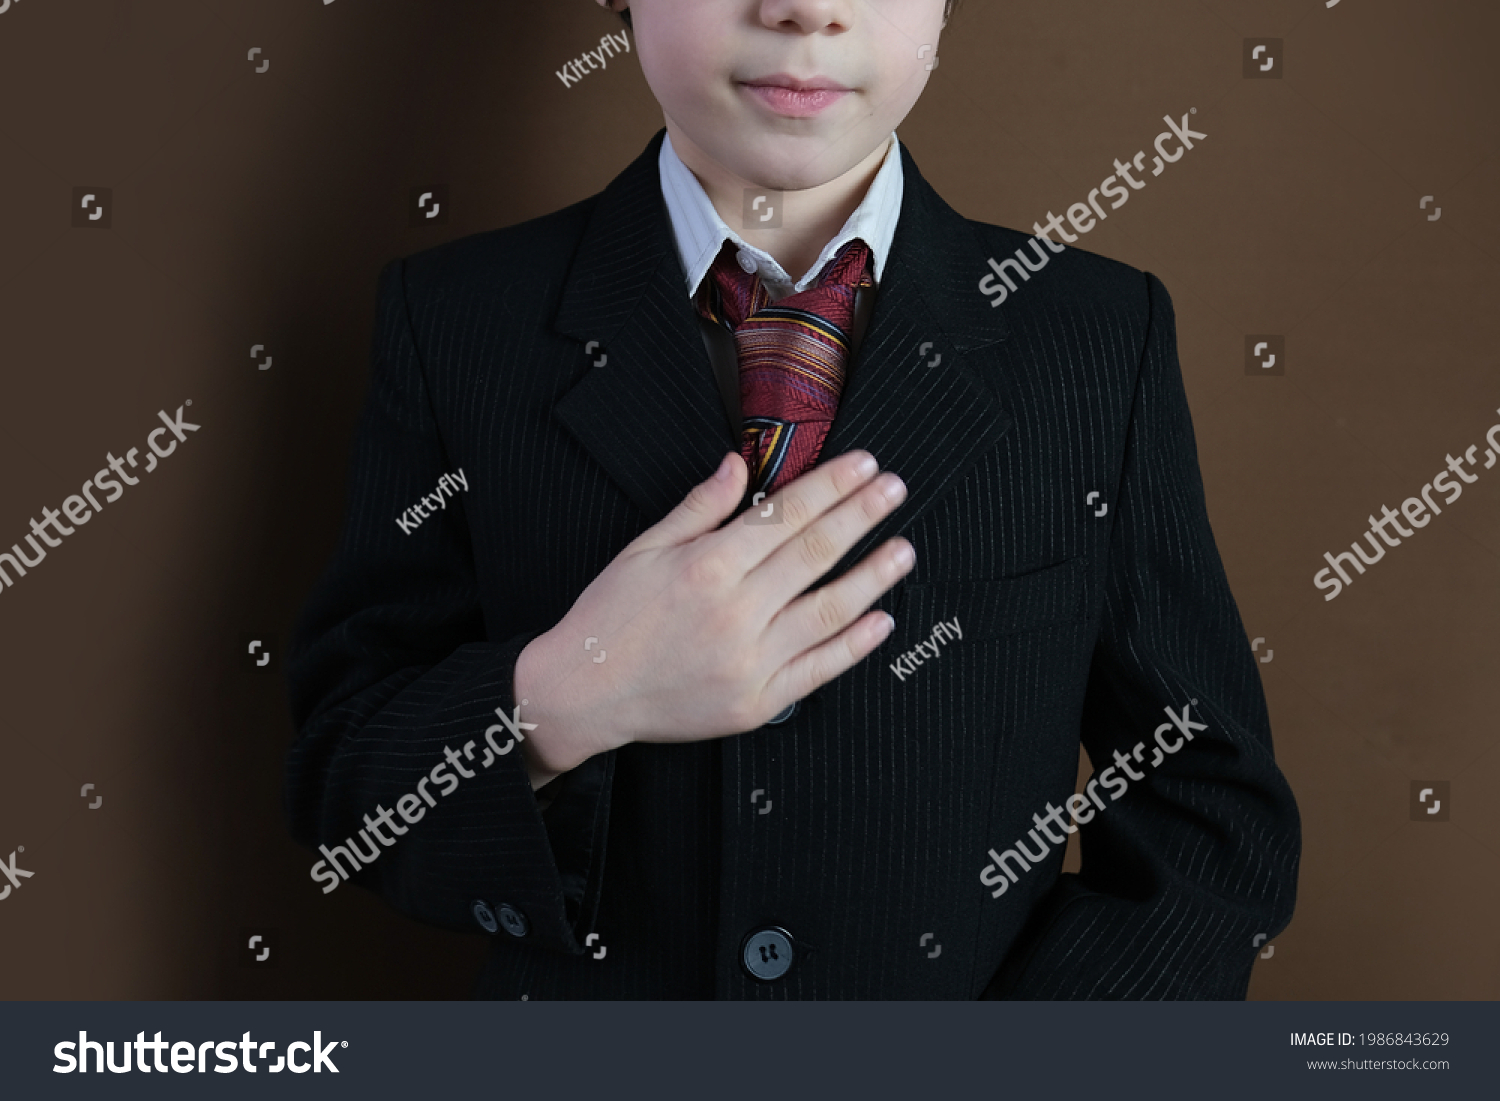 close-up of the lower part of the head of a child 8-10 years old, kid in a black business suit, tie smiling, formal uniform, concept of a young businessman, performance #1986843629